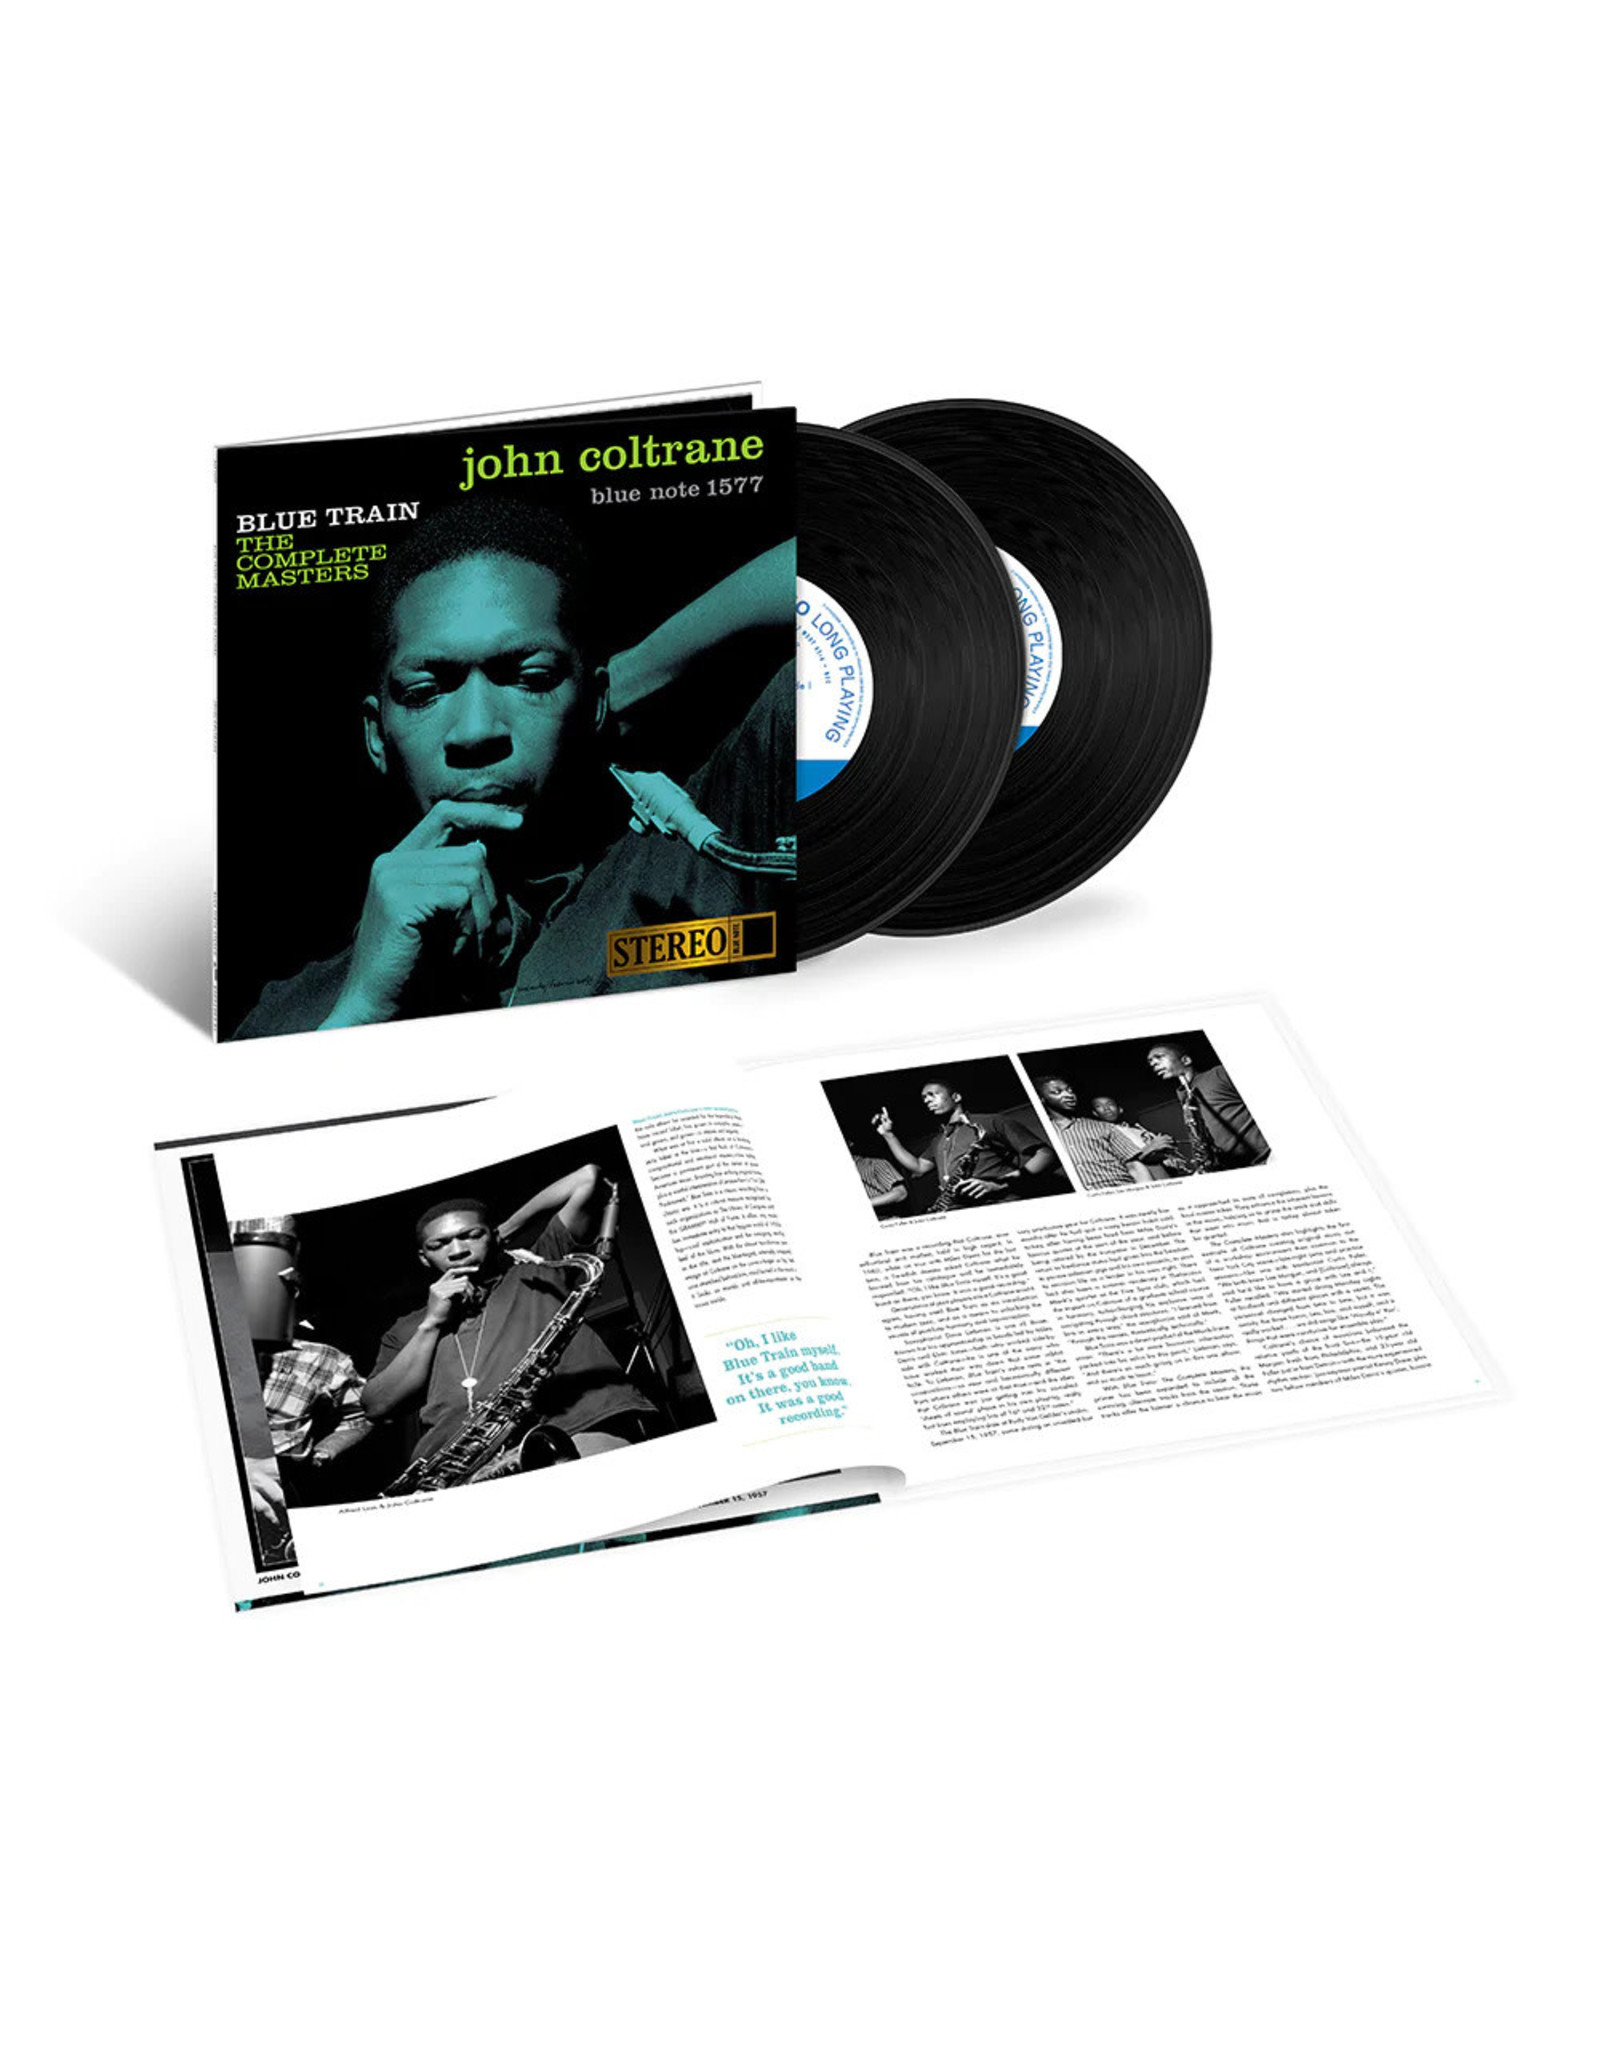 Blue Note Coltrane, John: Blue Train - The Complete Masters - Stereo (Blue Note Tone Poet) LP